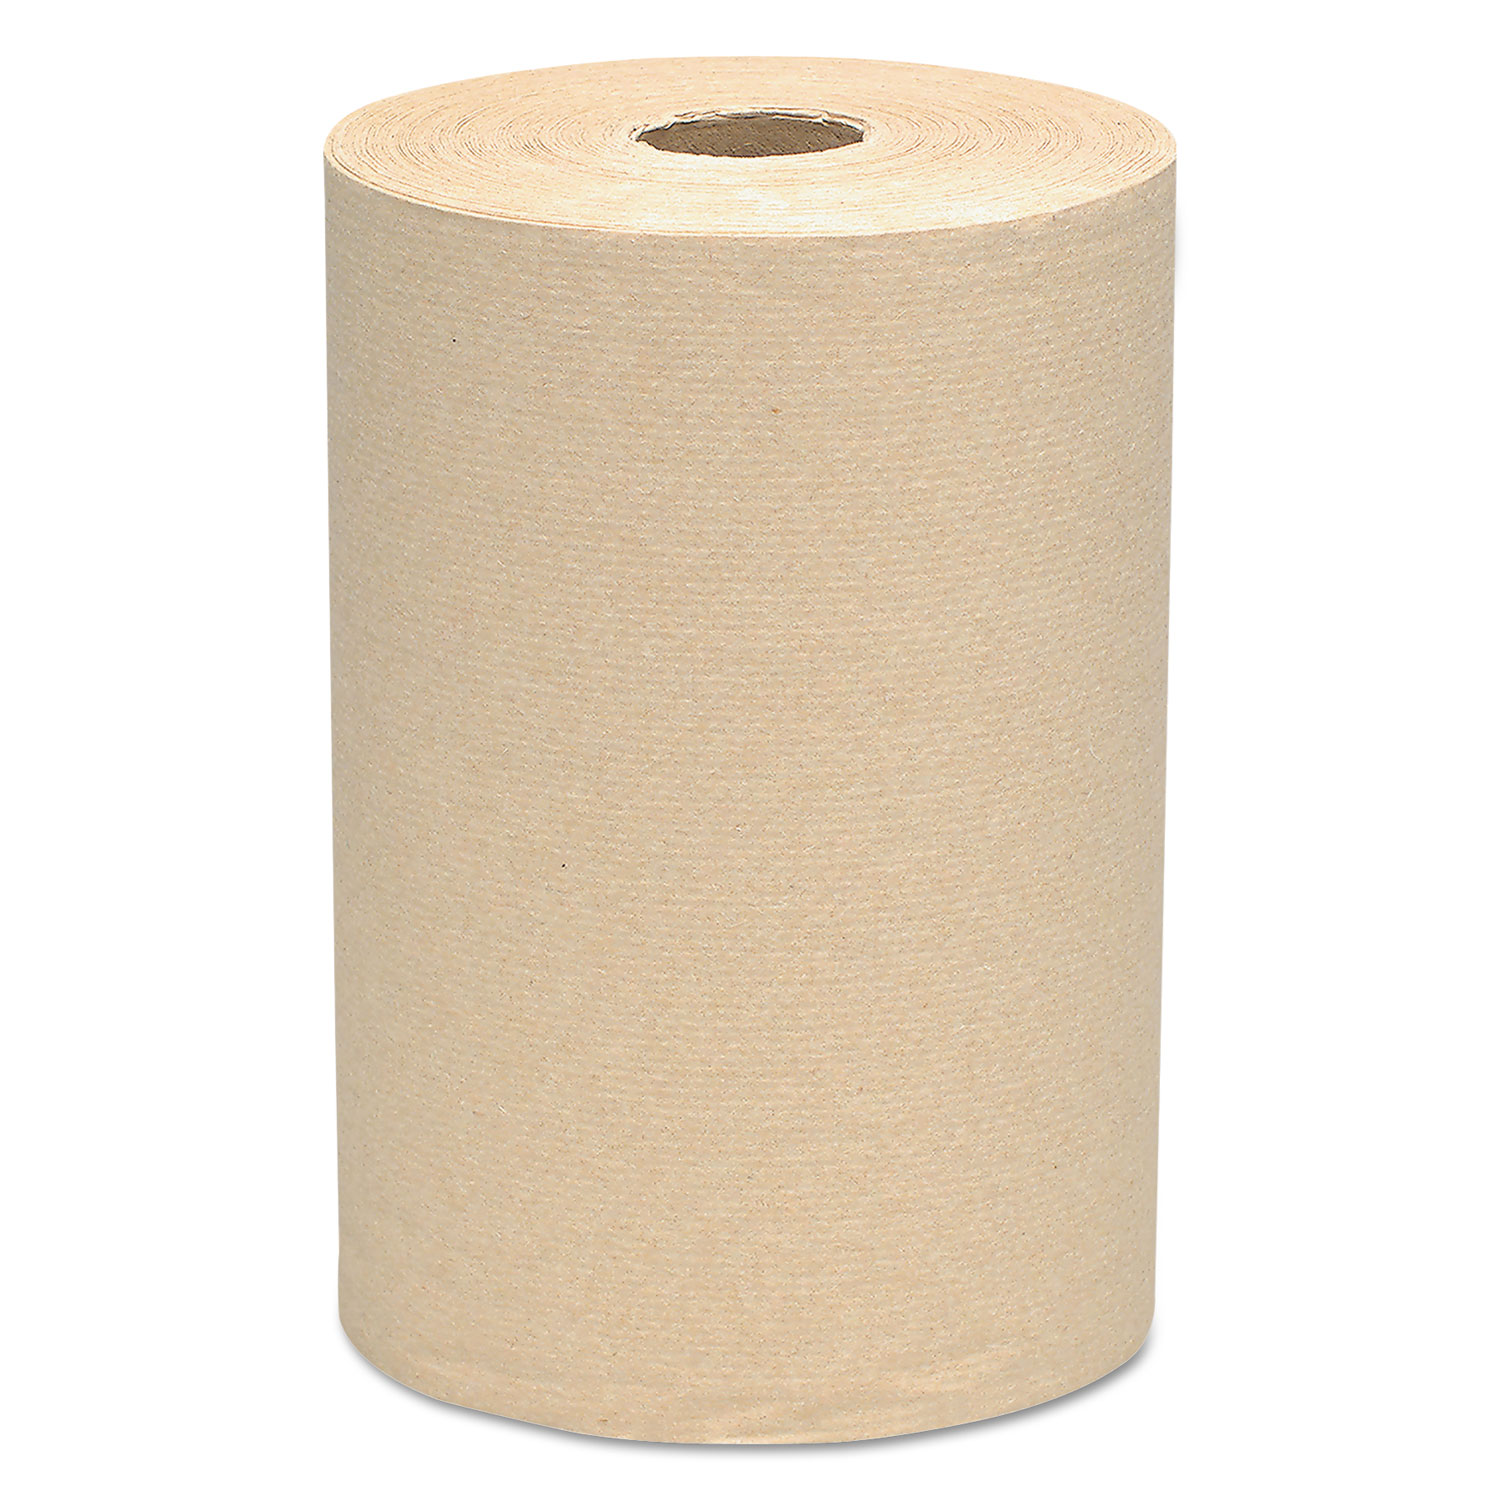  Scott 2021 Essential Hard Roll Towel, 100% Recycled, 1.5 Core, 8 x 400 ft, Natural, 12/CT (KCC02021) 